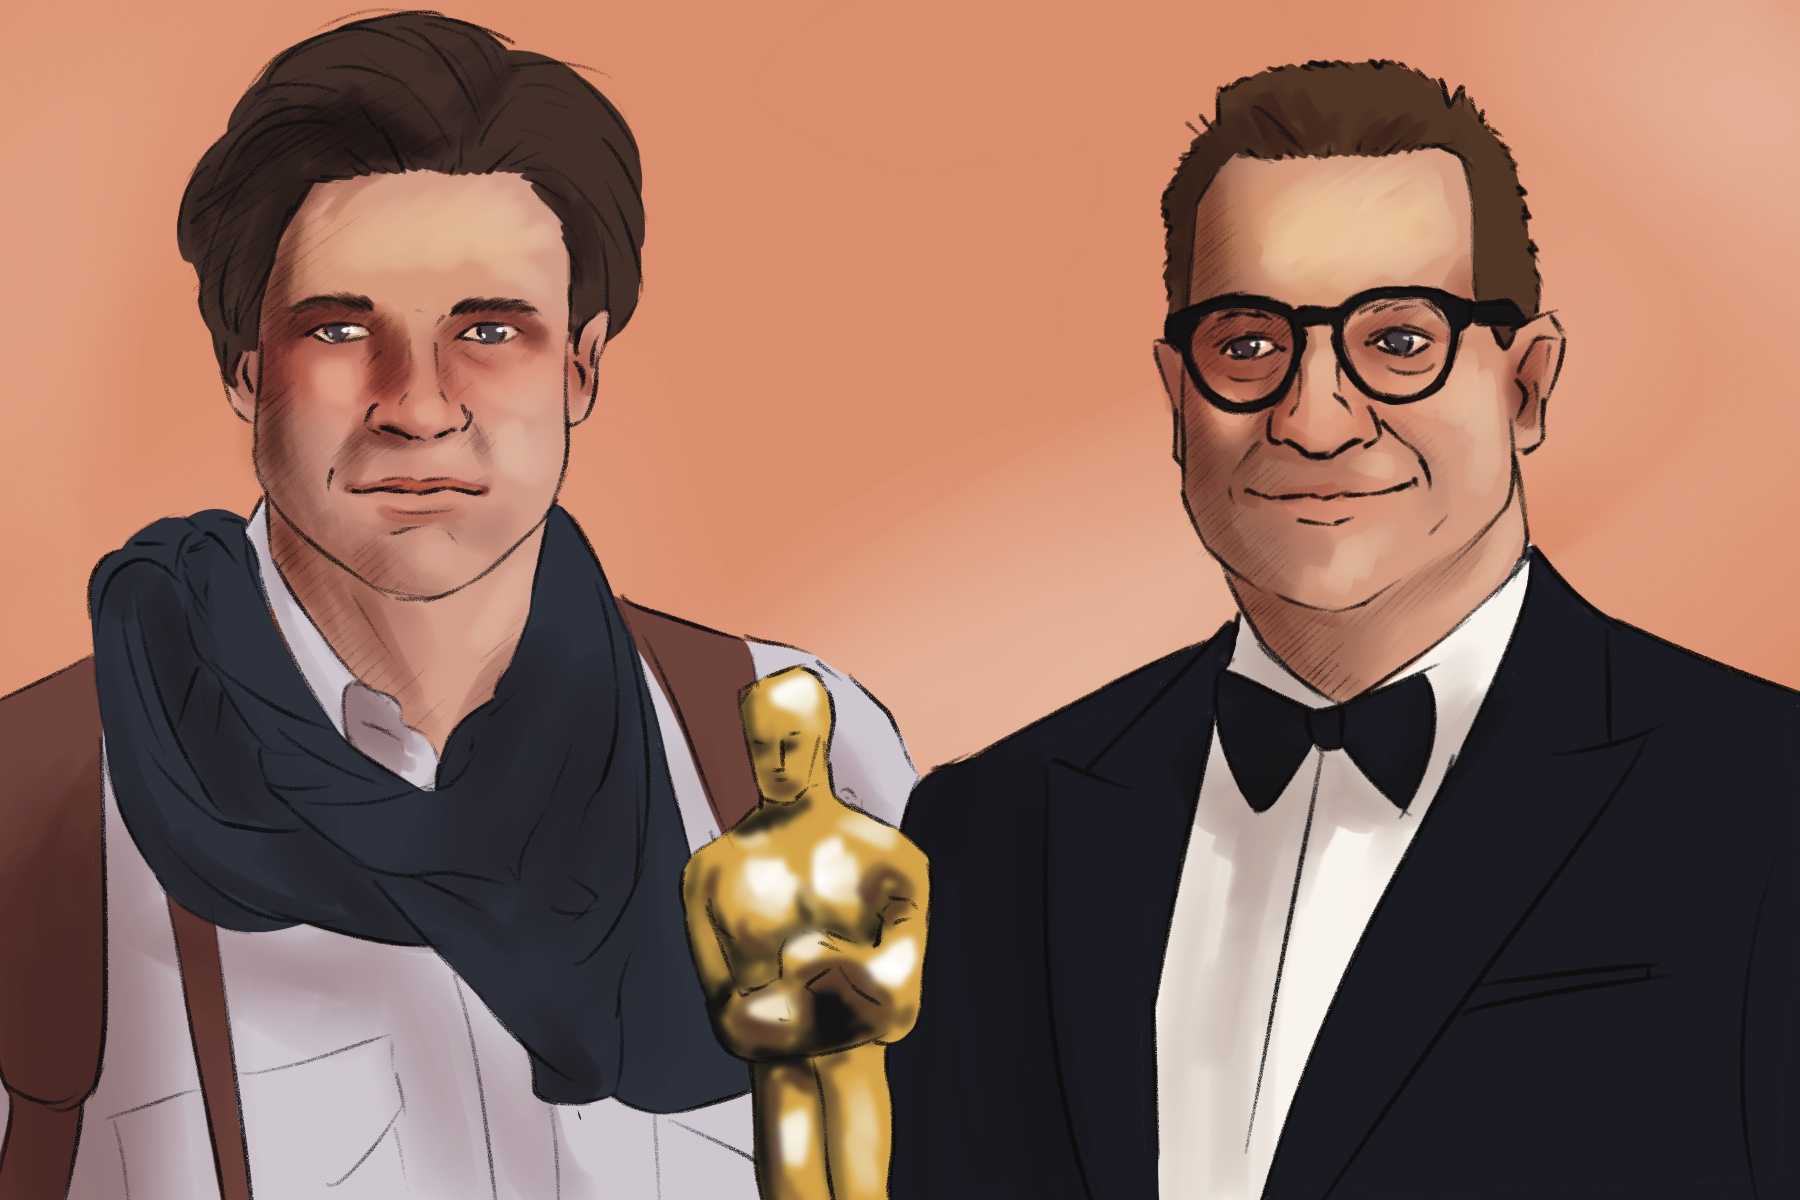 On the left of the image is Brendan Fraser wearing a white shirt with suspenders and a dark scarf - his costume from the movie 'The Mummy.' To the right is Brendan Fraser wearing a black tuxedo with a bowtie and glasses. In between the two figures is a golden Oscars statue.